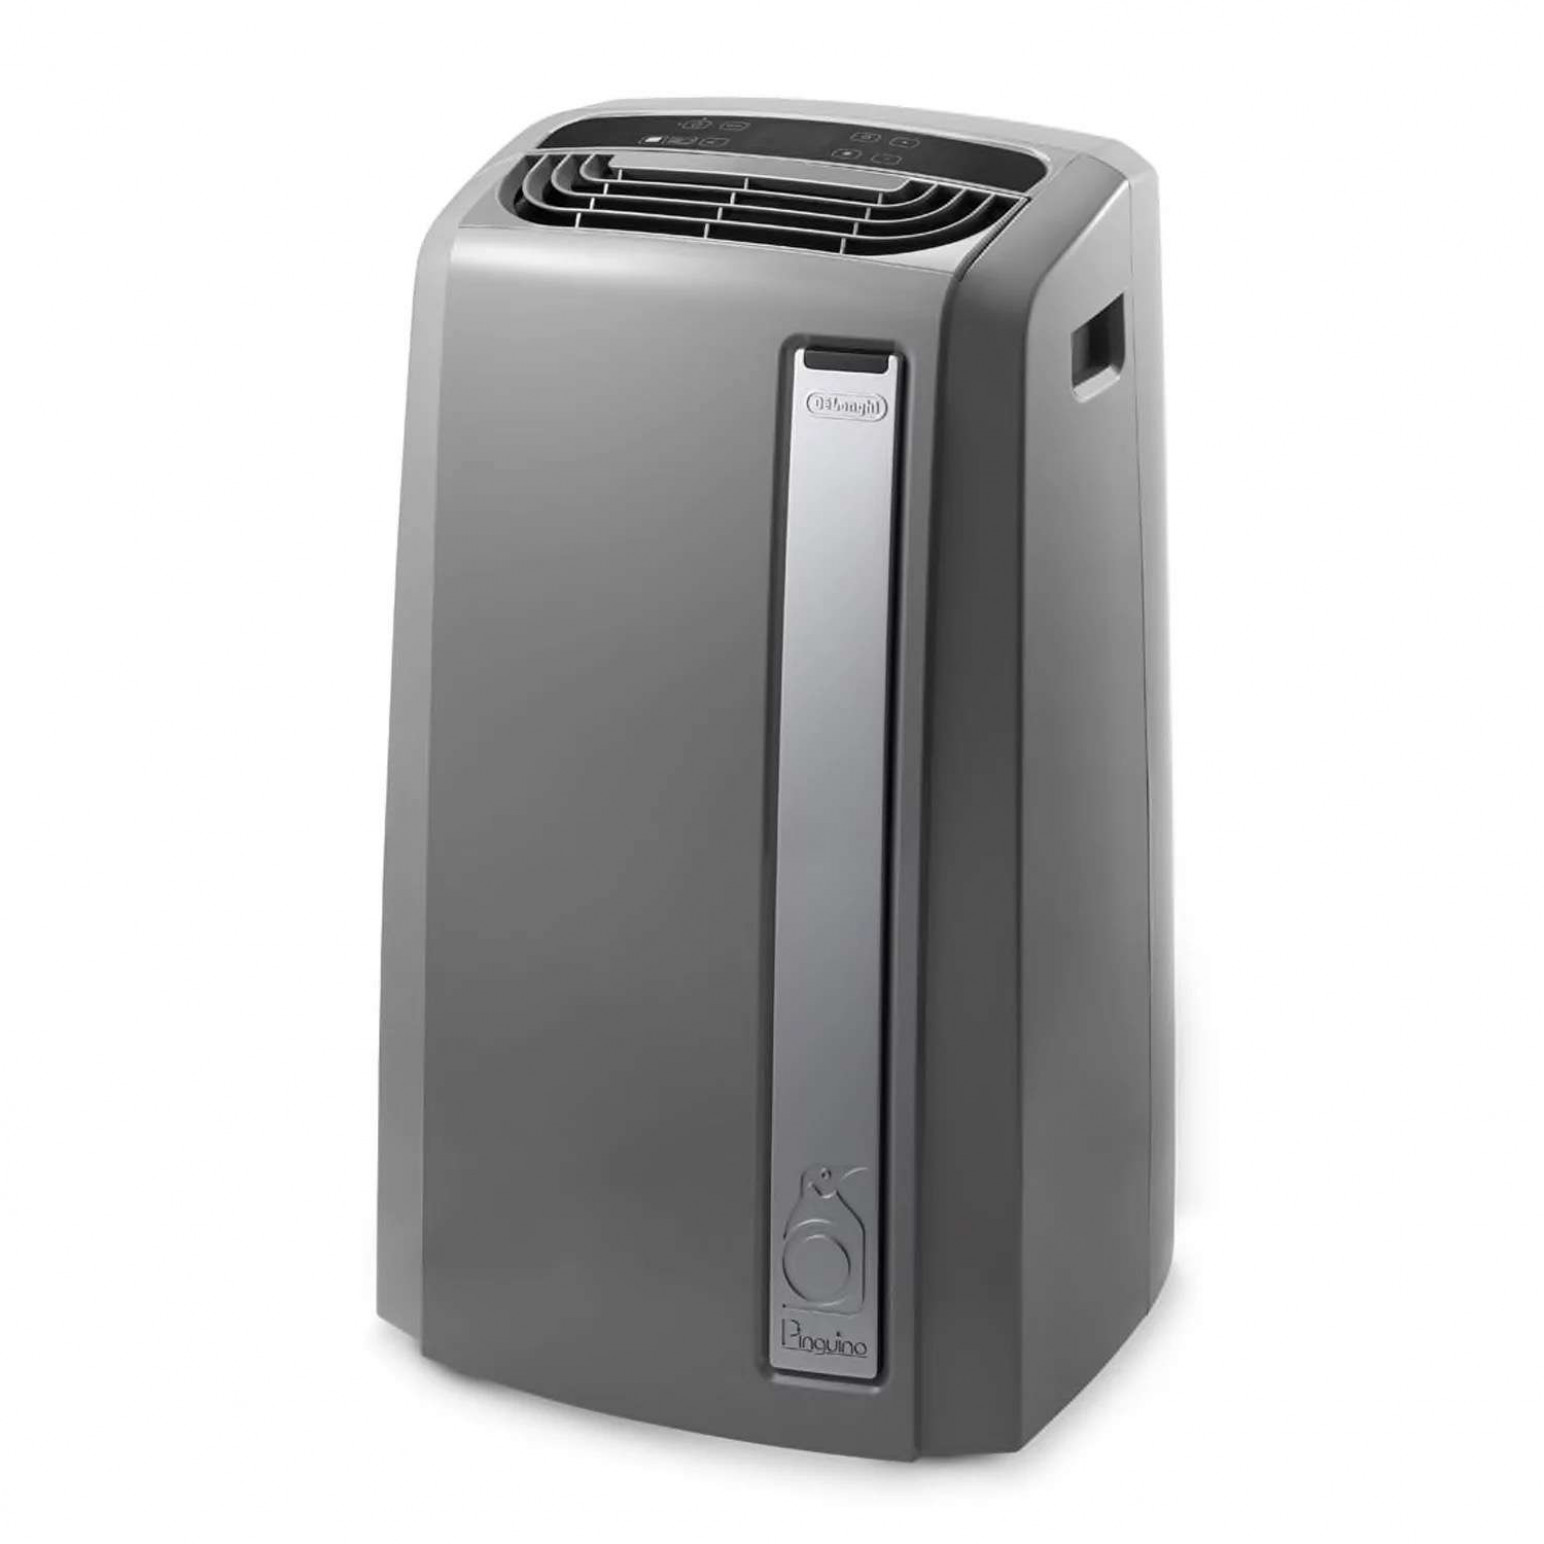 Which Portable Ac Brand Is Best